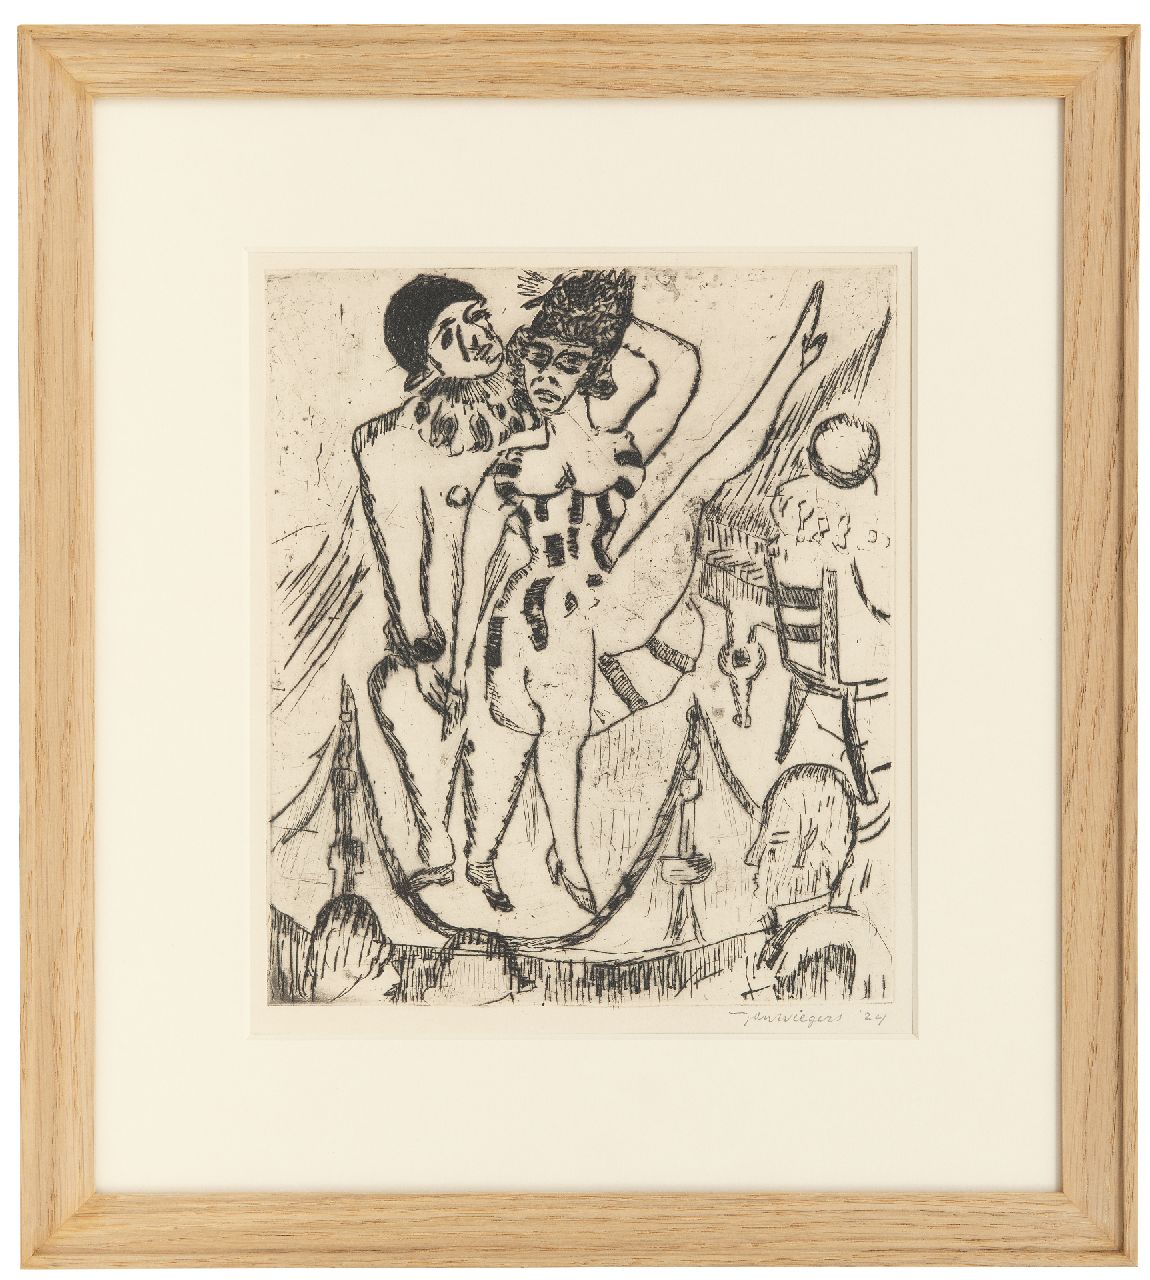 Wiegers J.  | Jan Wiegers, Variety show, etching 26.0 x 21.8 cm, signed l.r. (in pencil) and dated '24 (in pencil)